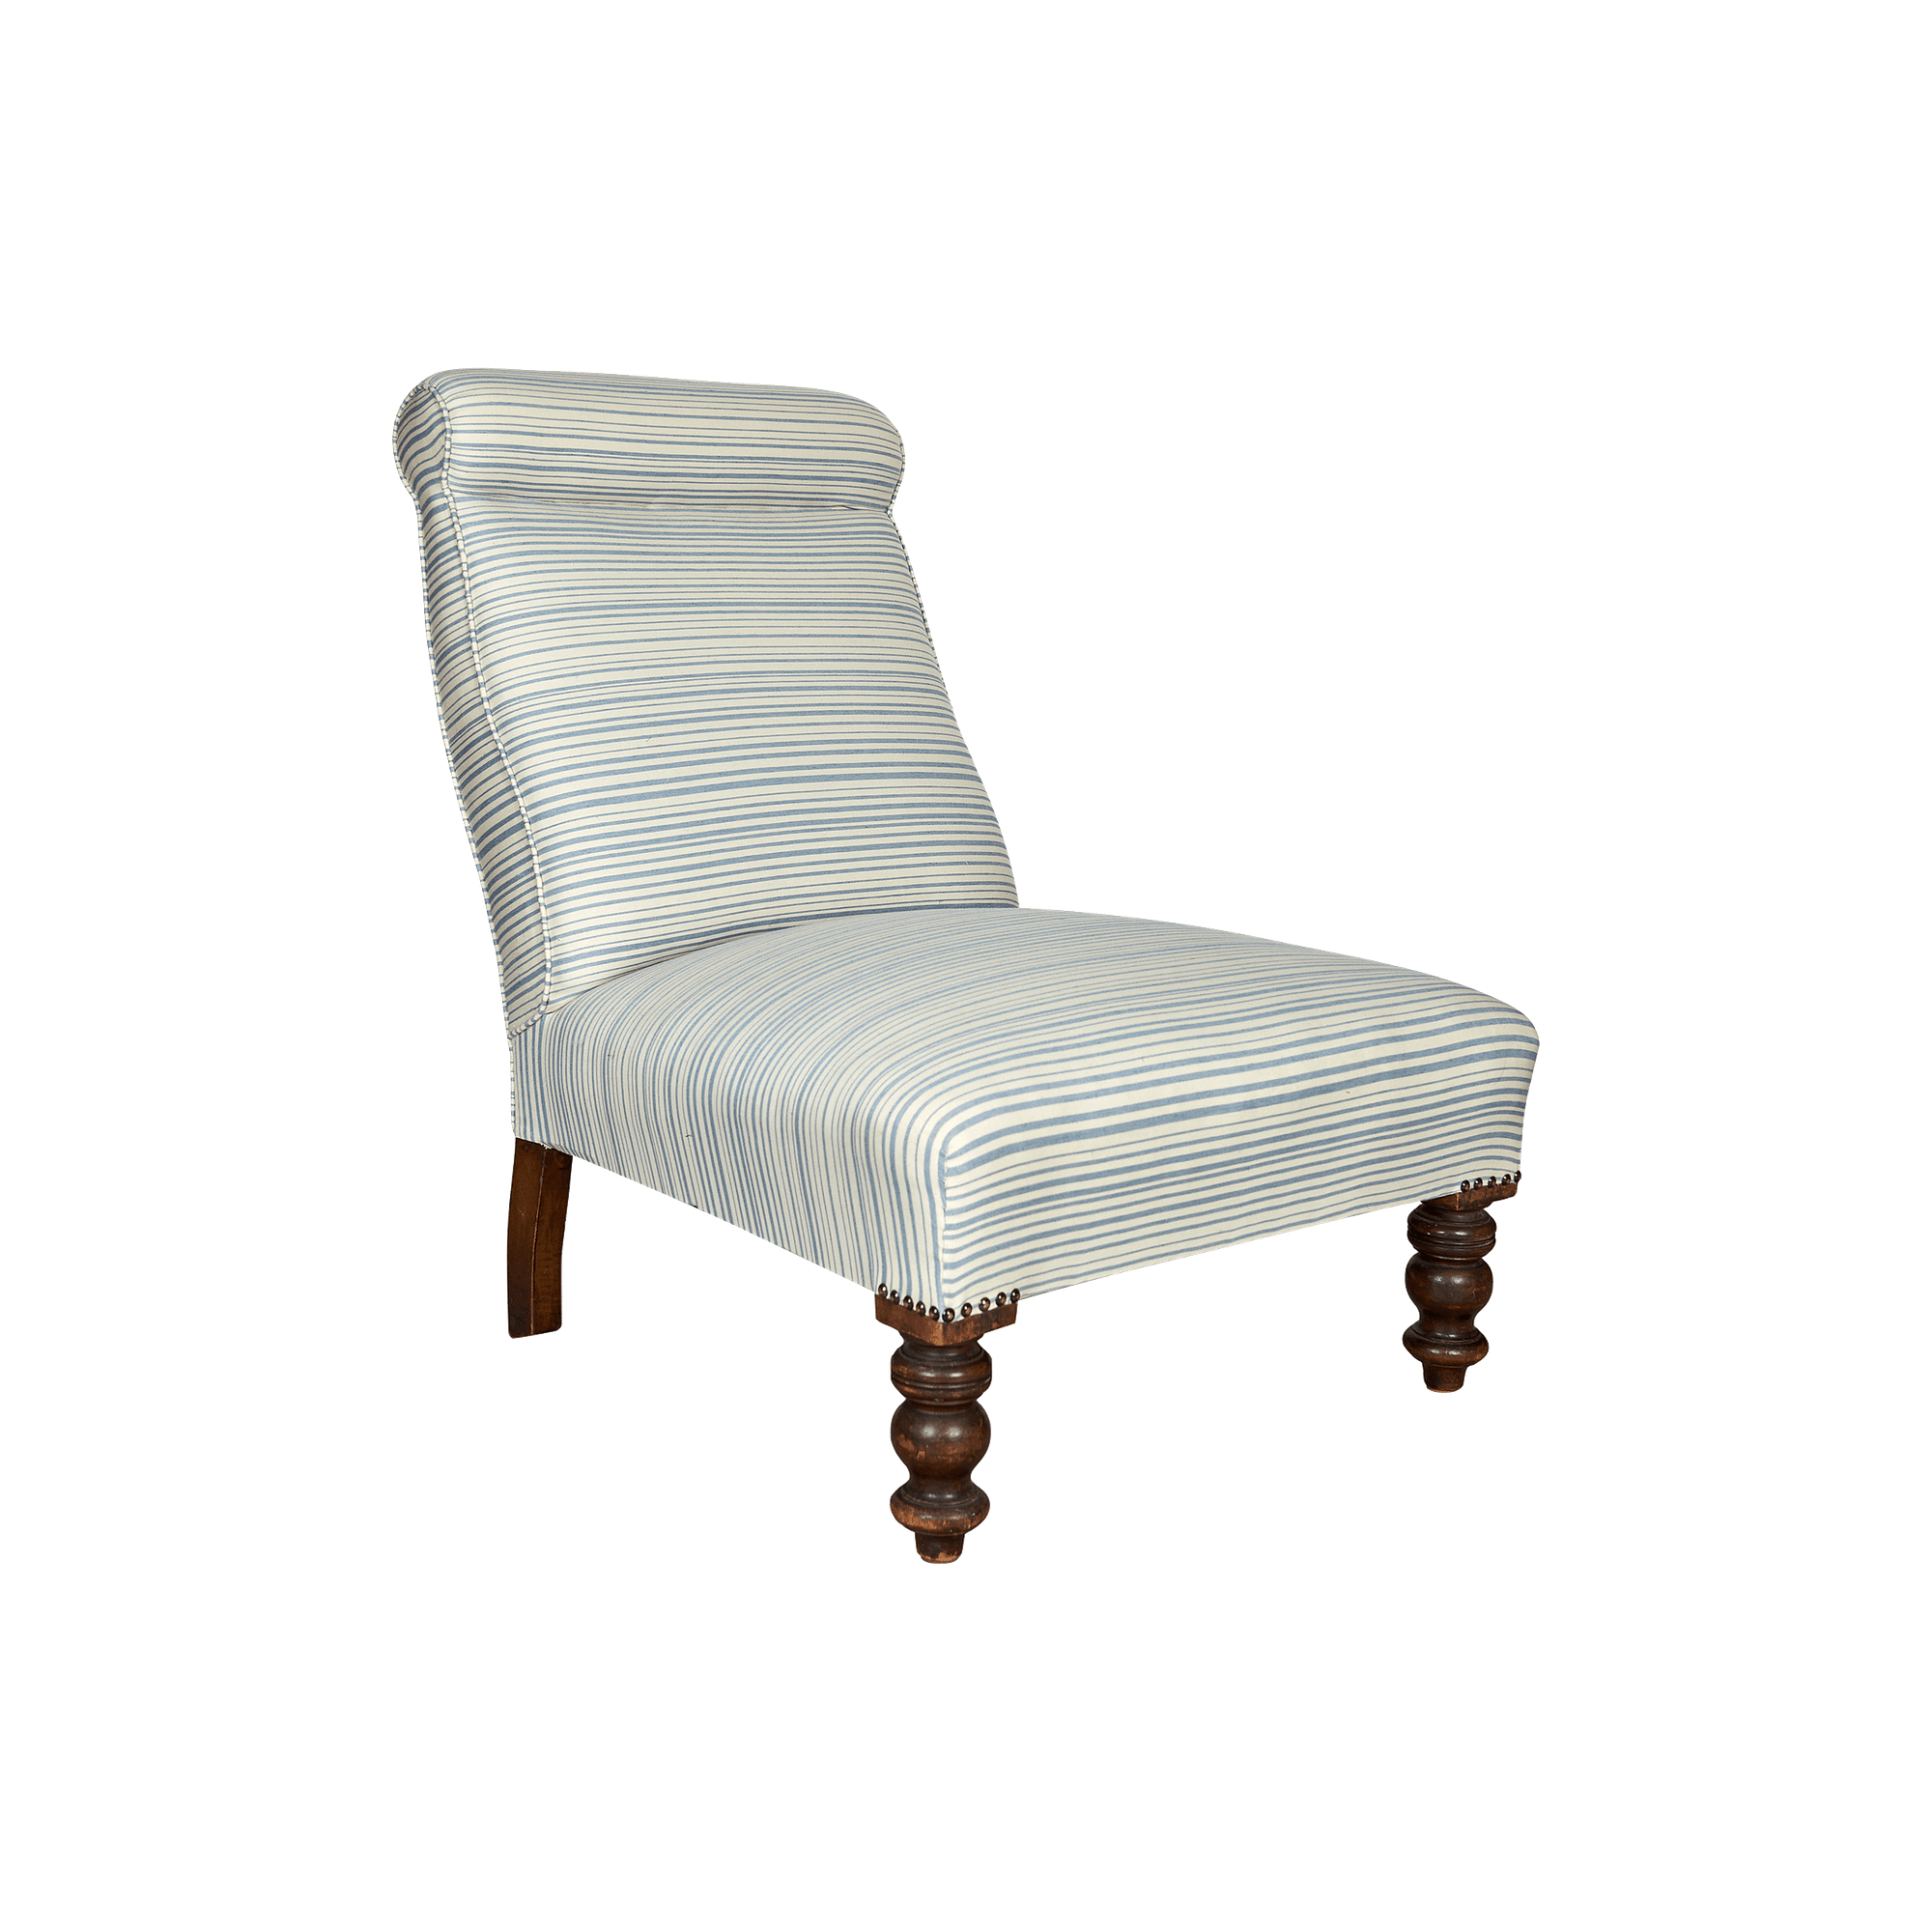 ASC-001 Armless slipper chair with bobble front legs in Horizon Stripe Blue Fabric